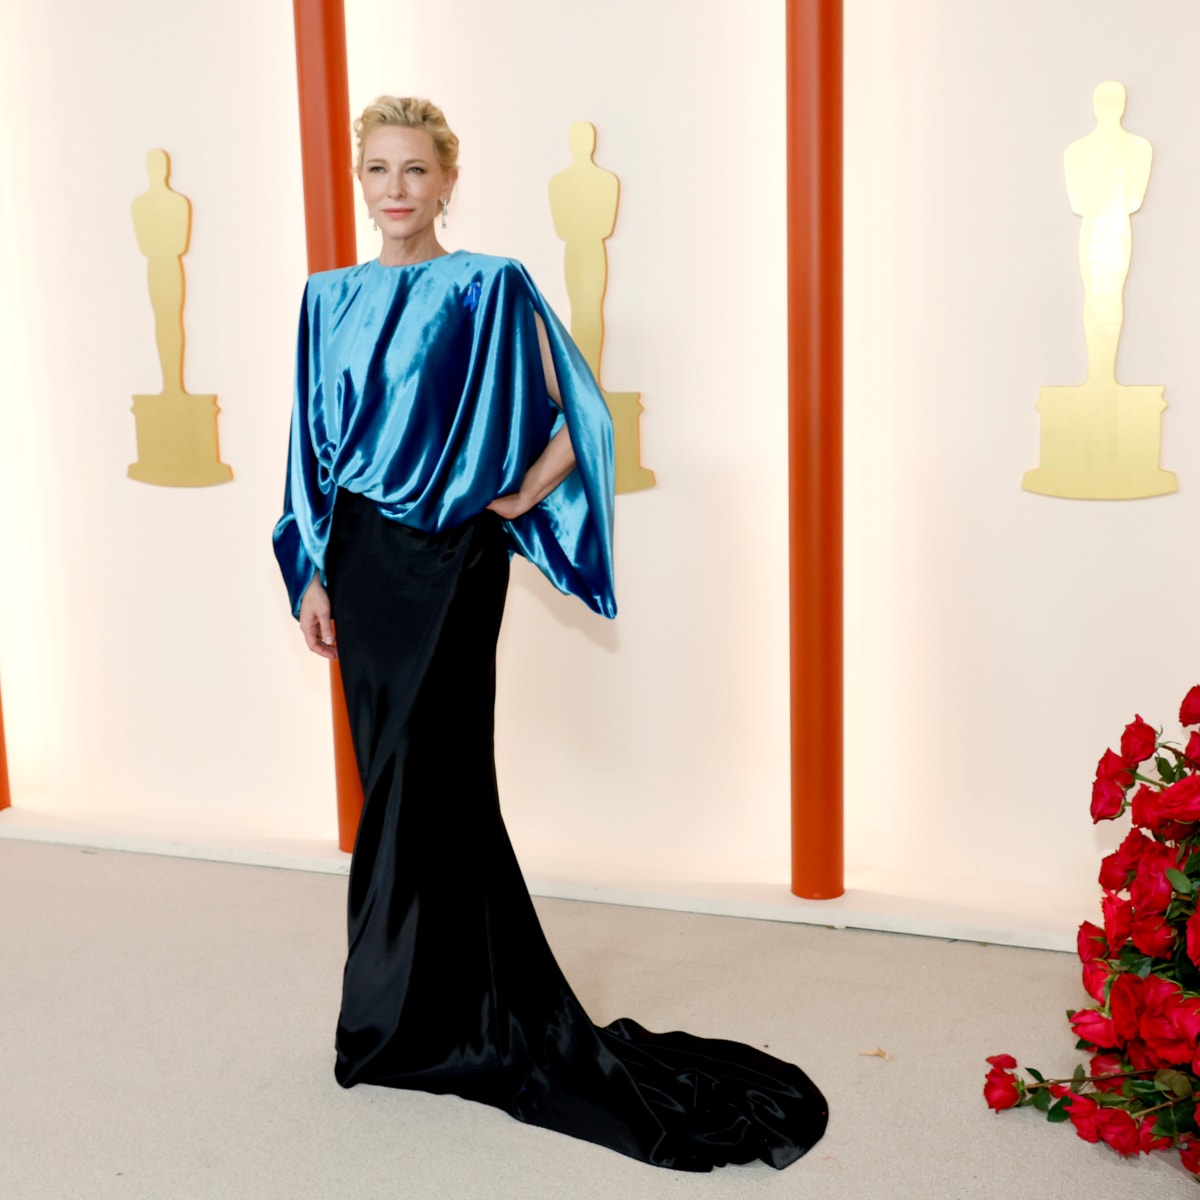 8 Sustainable Oscars Red Carpet Looks, From Vintage Chanel to